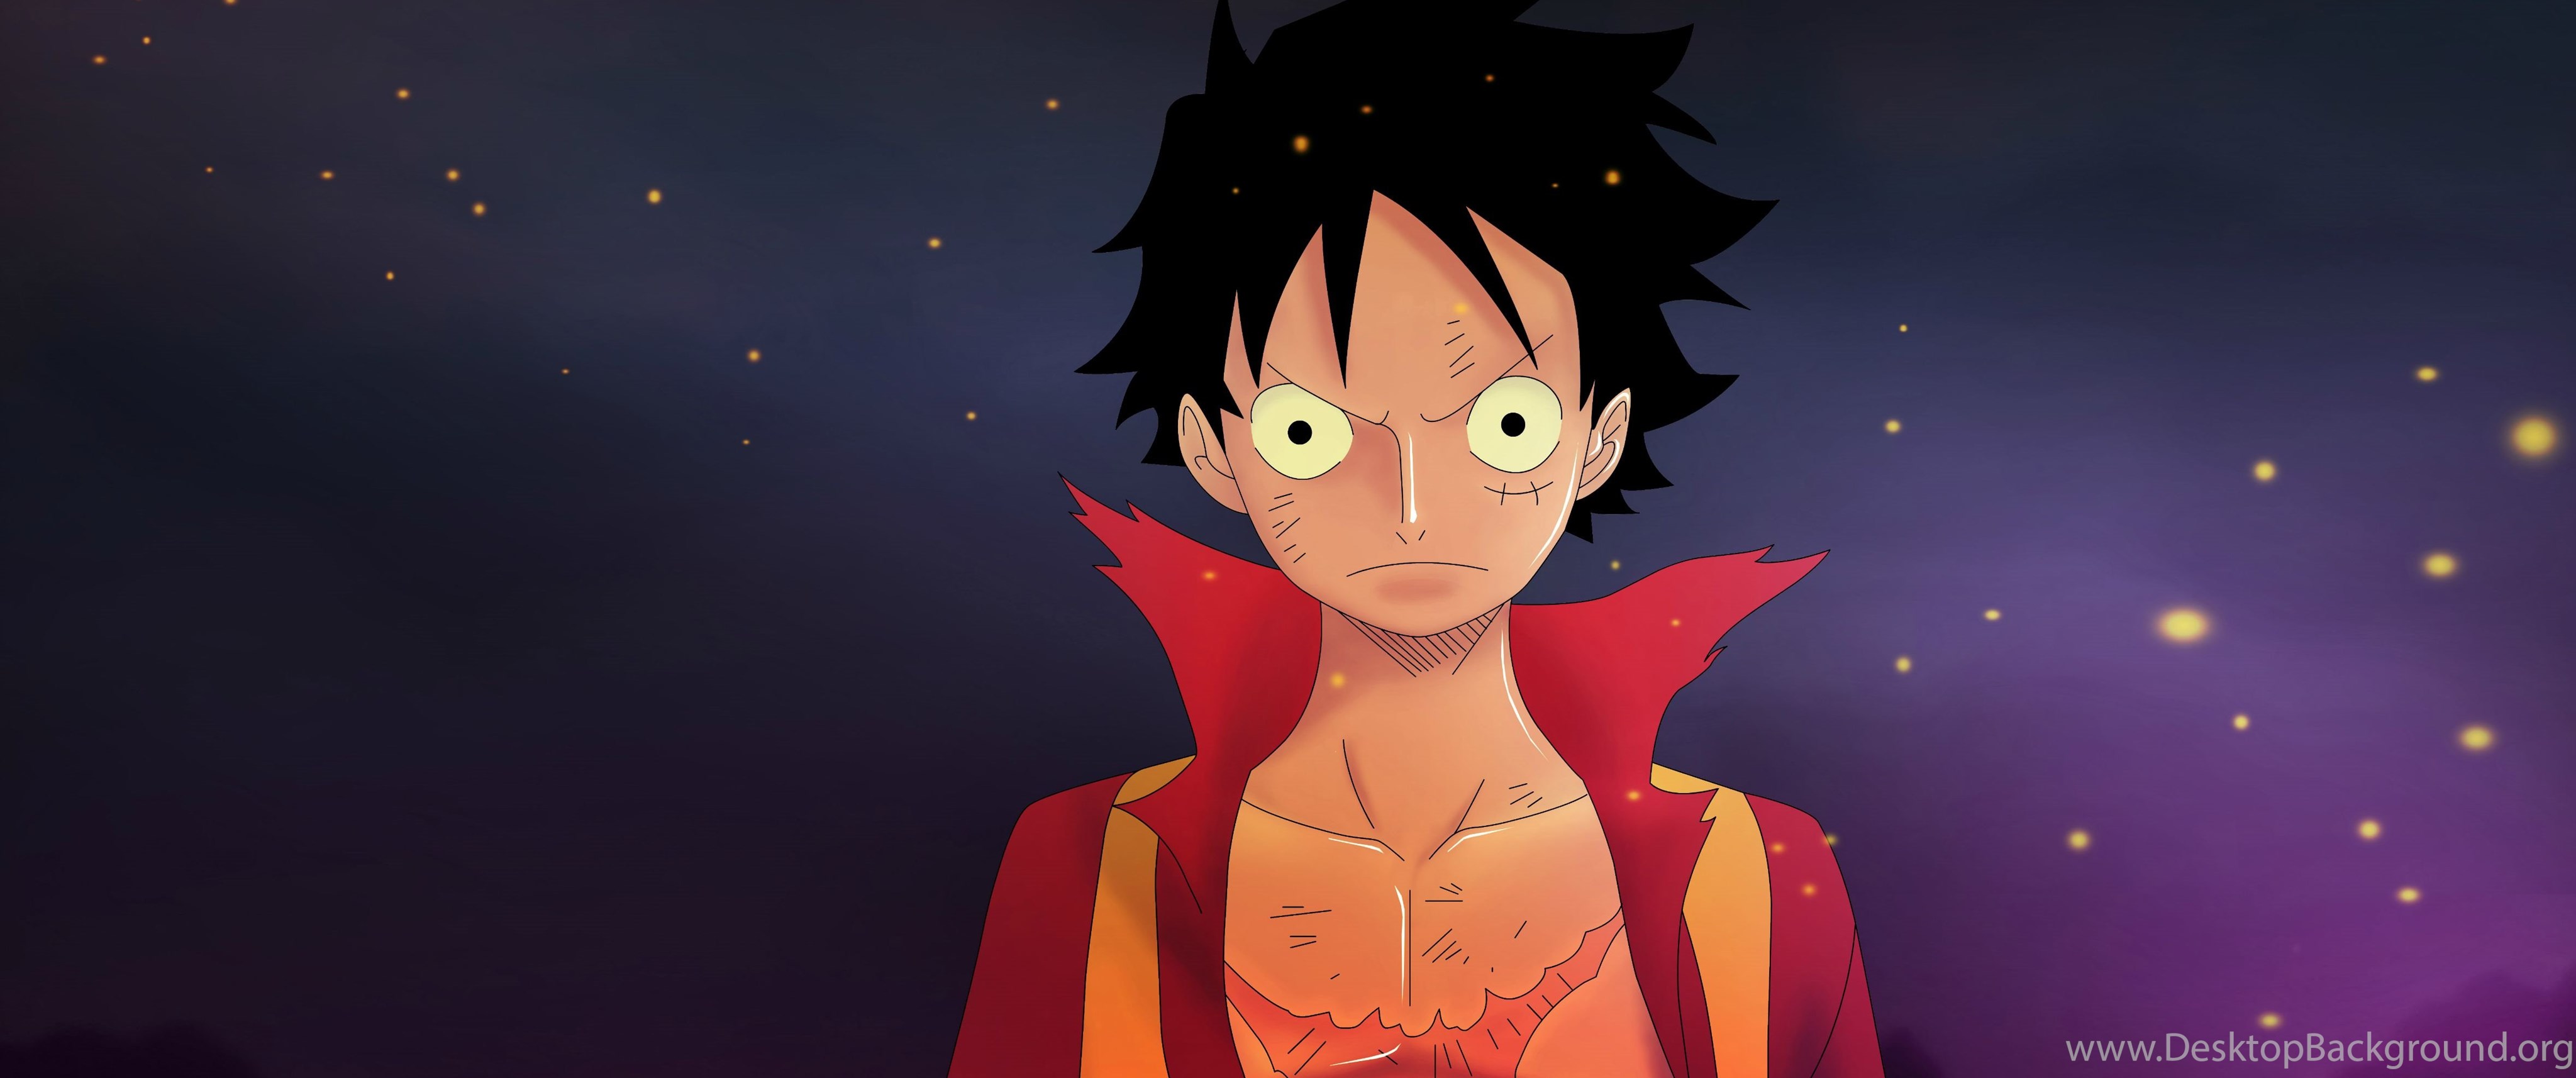 One Piece Luffy Wallpapers Iphone Anime Wallpapers Kokeancom